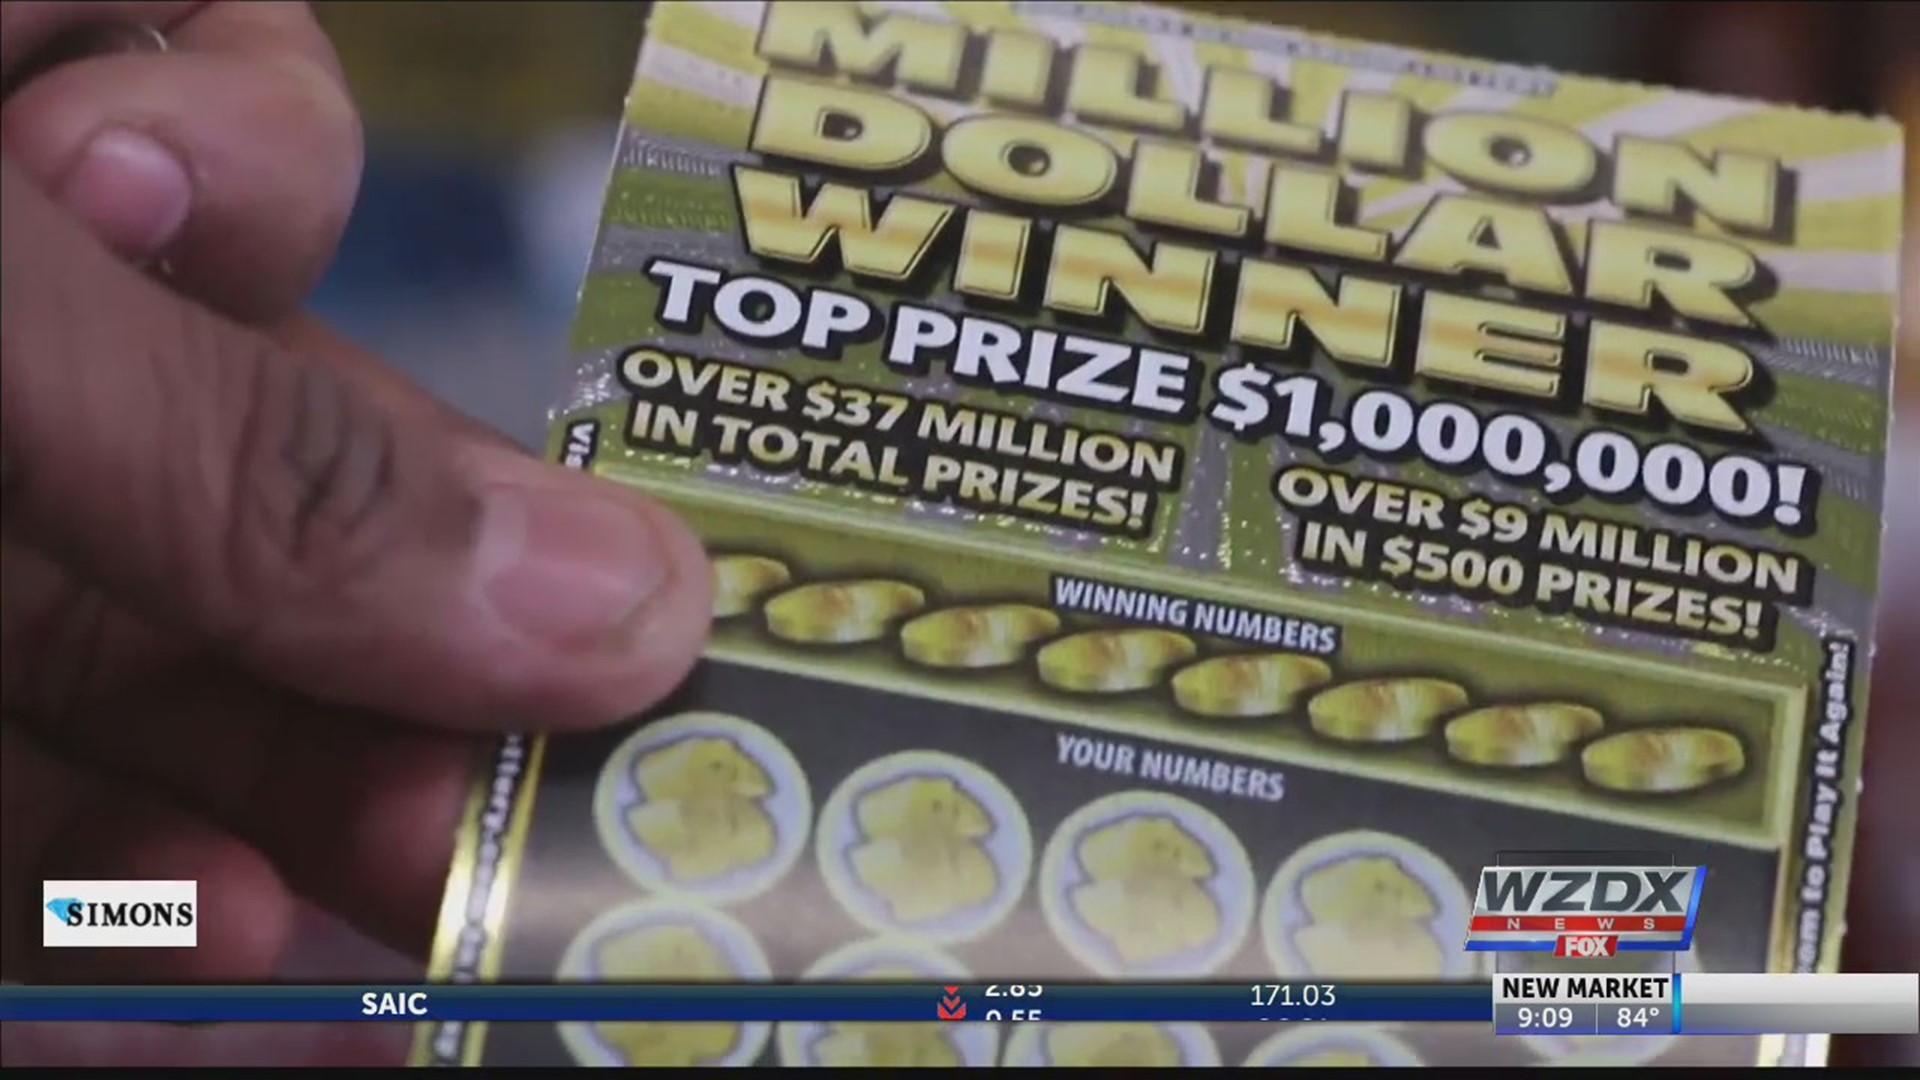 The Mississippi Lottery Commission announced plans to start offering lottery scratch-off tickets on December 1.